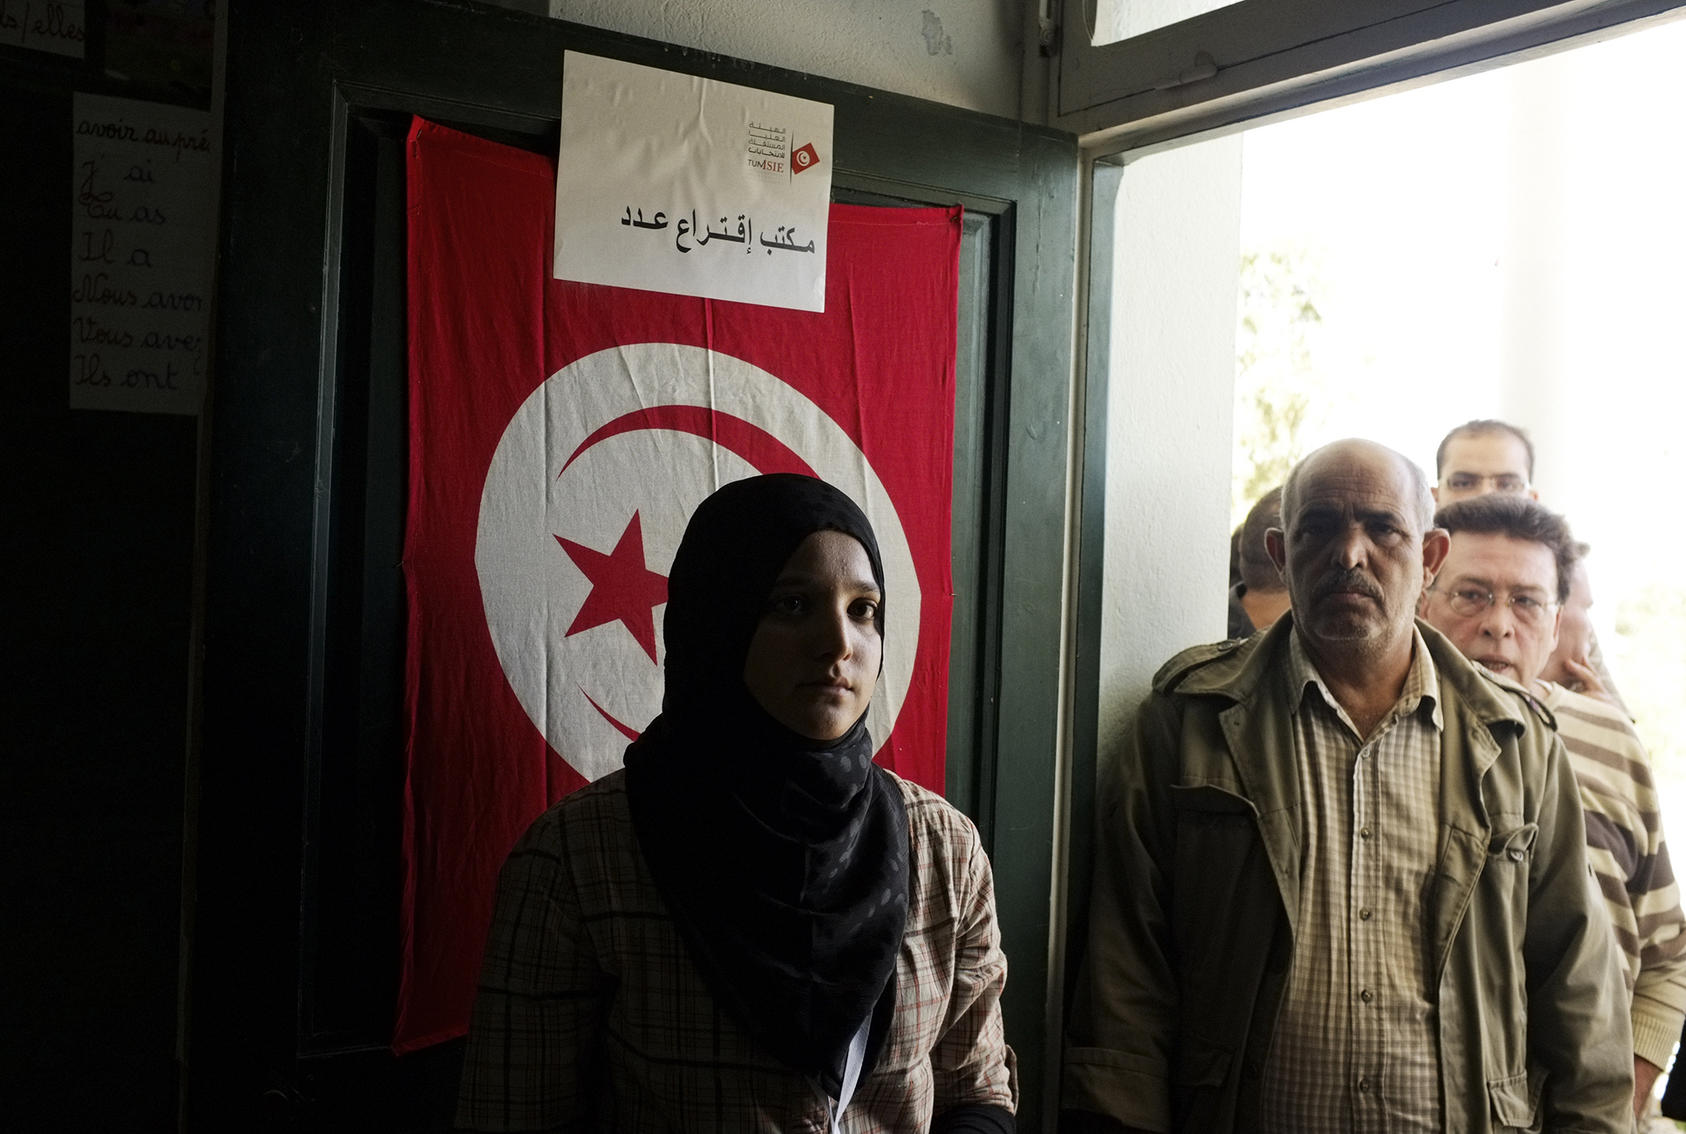 Voters wait their turn to cast their ballots at a polling site in a school in Tunis, Tunisia, on Oct. 23, 2011. (Moises Saman/The New York Times) 